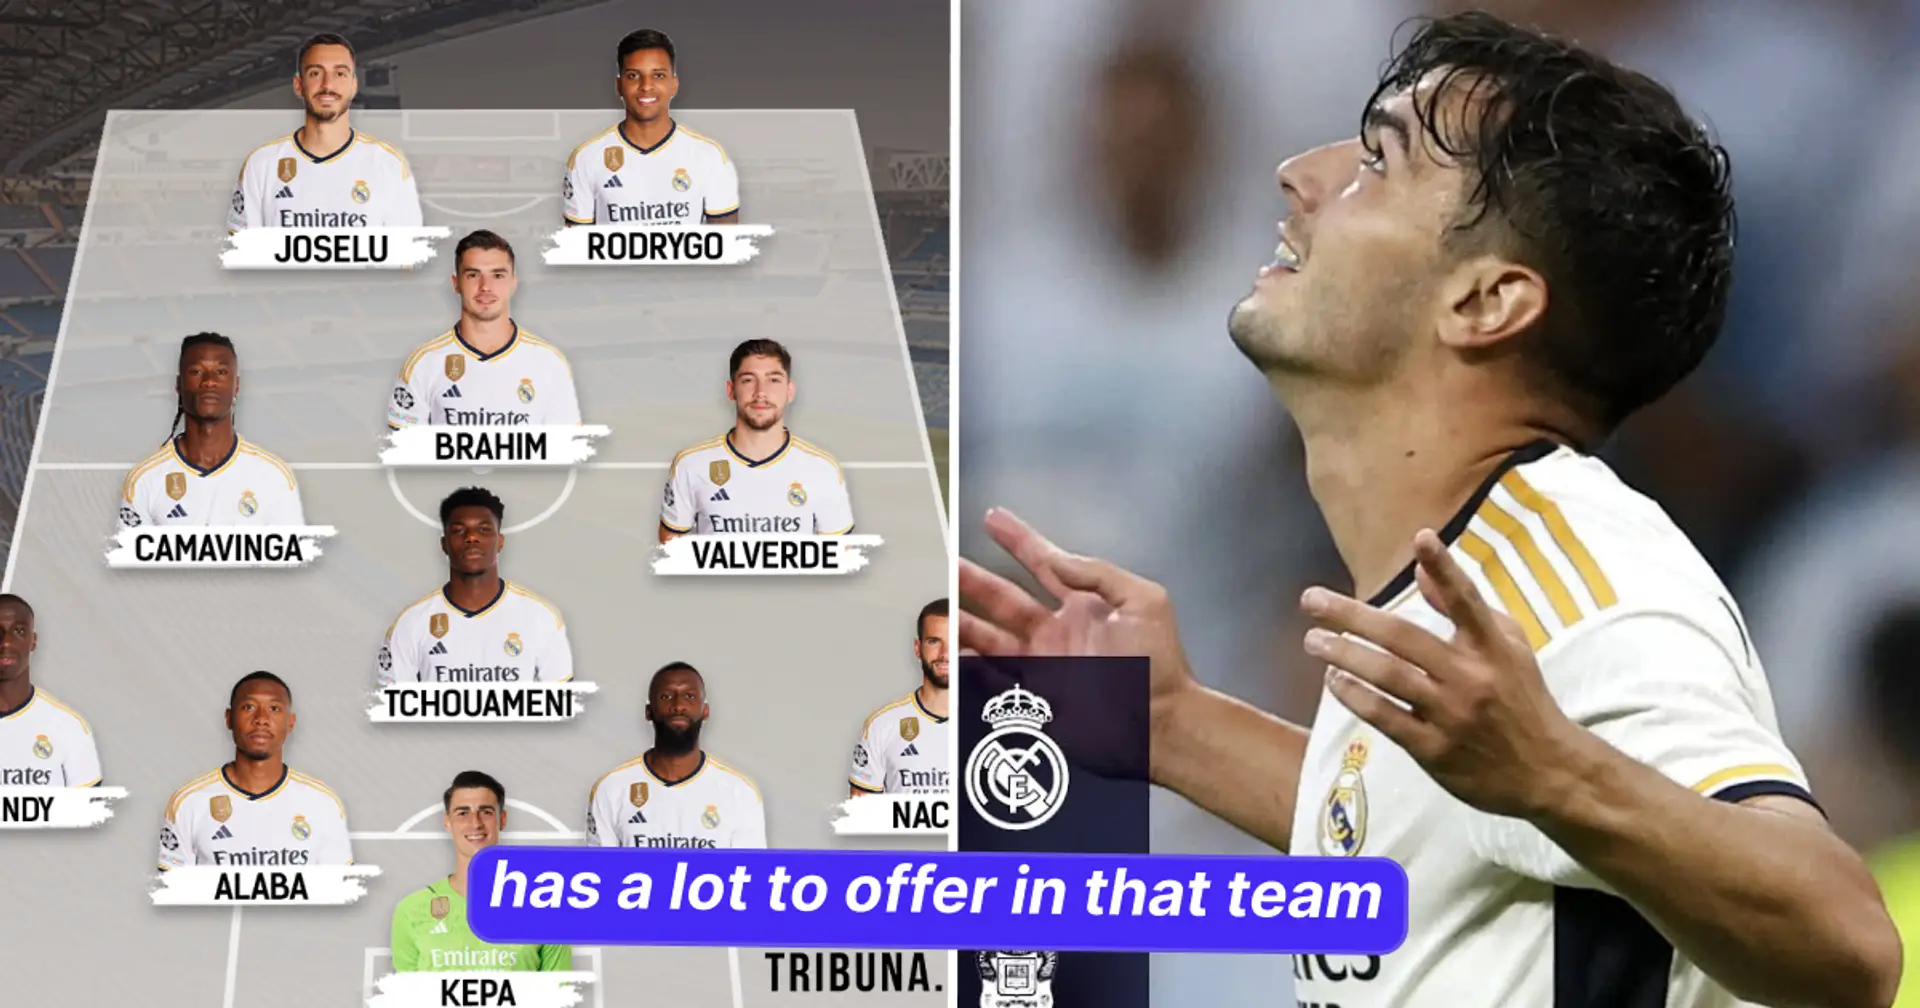 'Let Rodrygo rest': Real Madrid fans want one in-form player to start in tricky clash v Girona